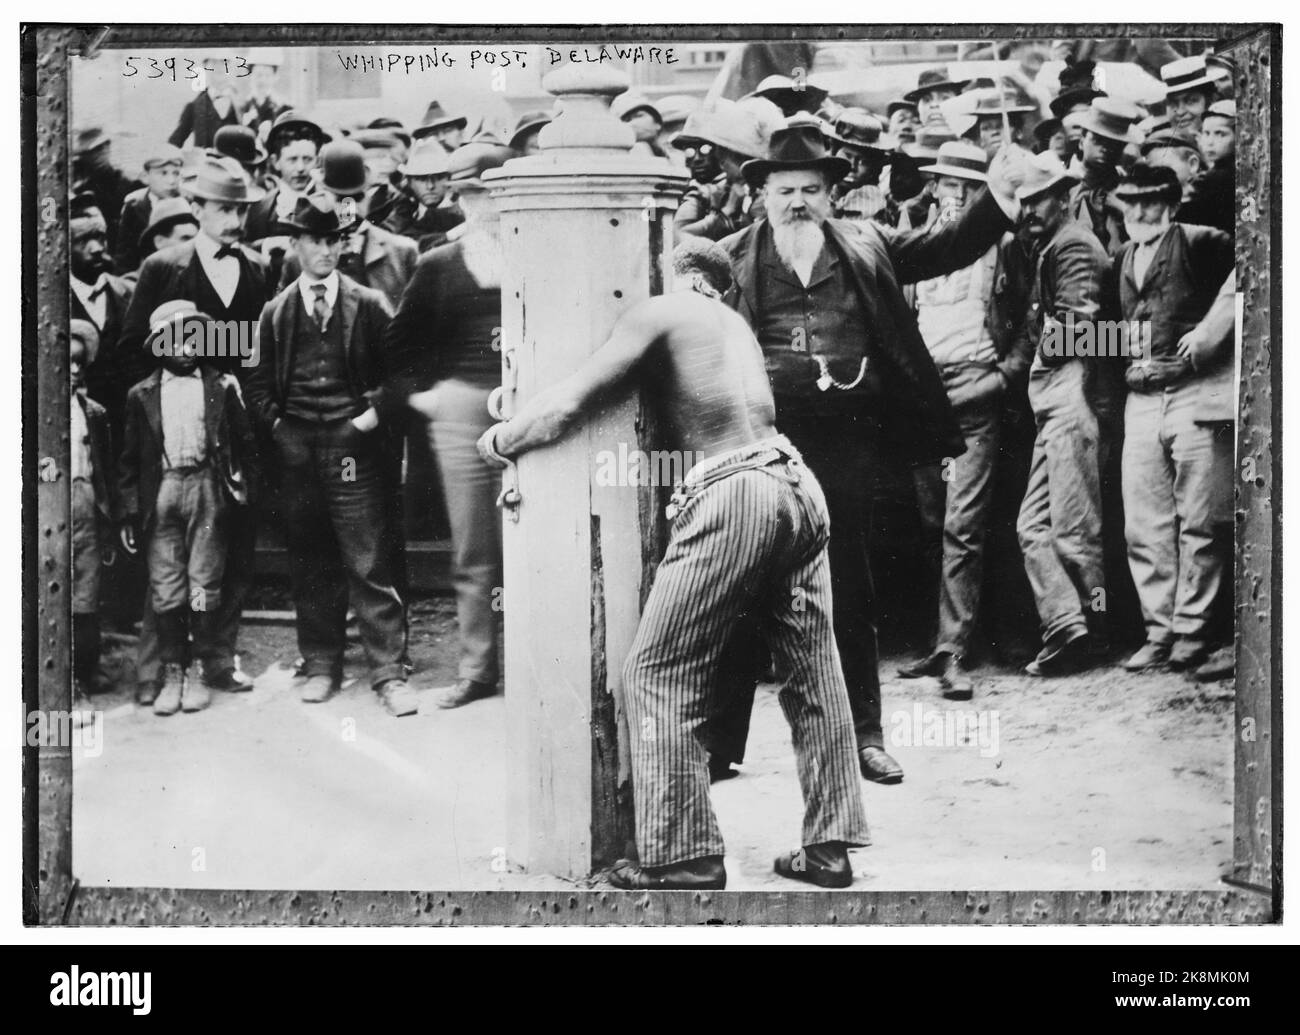 Whipping Post, Delaware, USA - 1900 - Possibly at Kent County Jail, Dover, Delaware, USA. Stock Photo